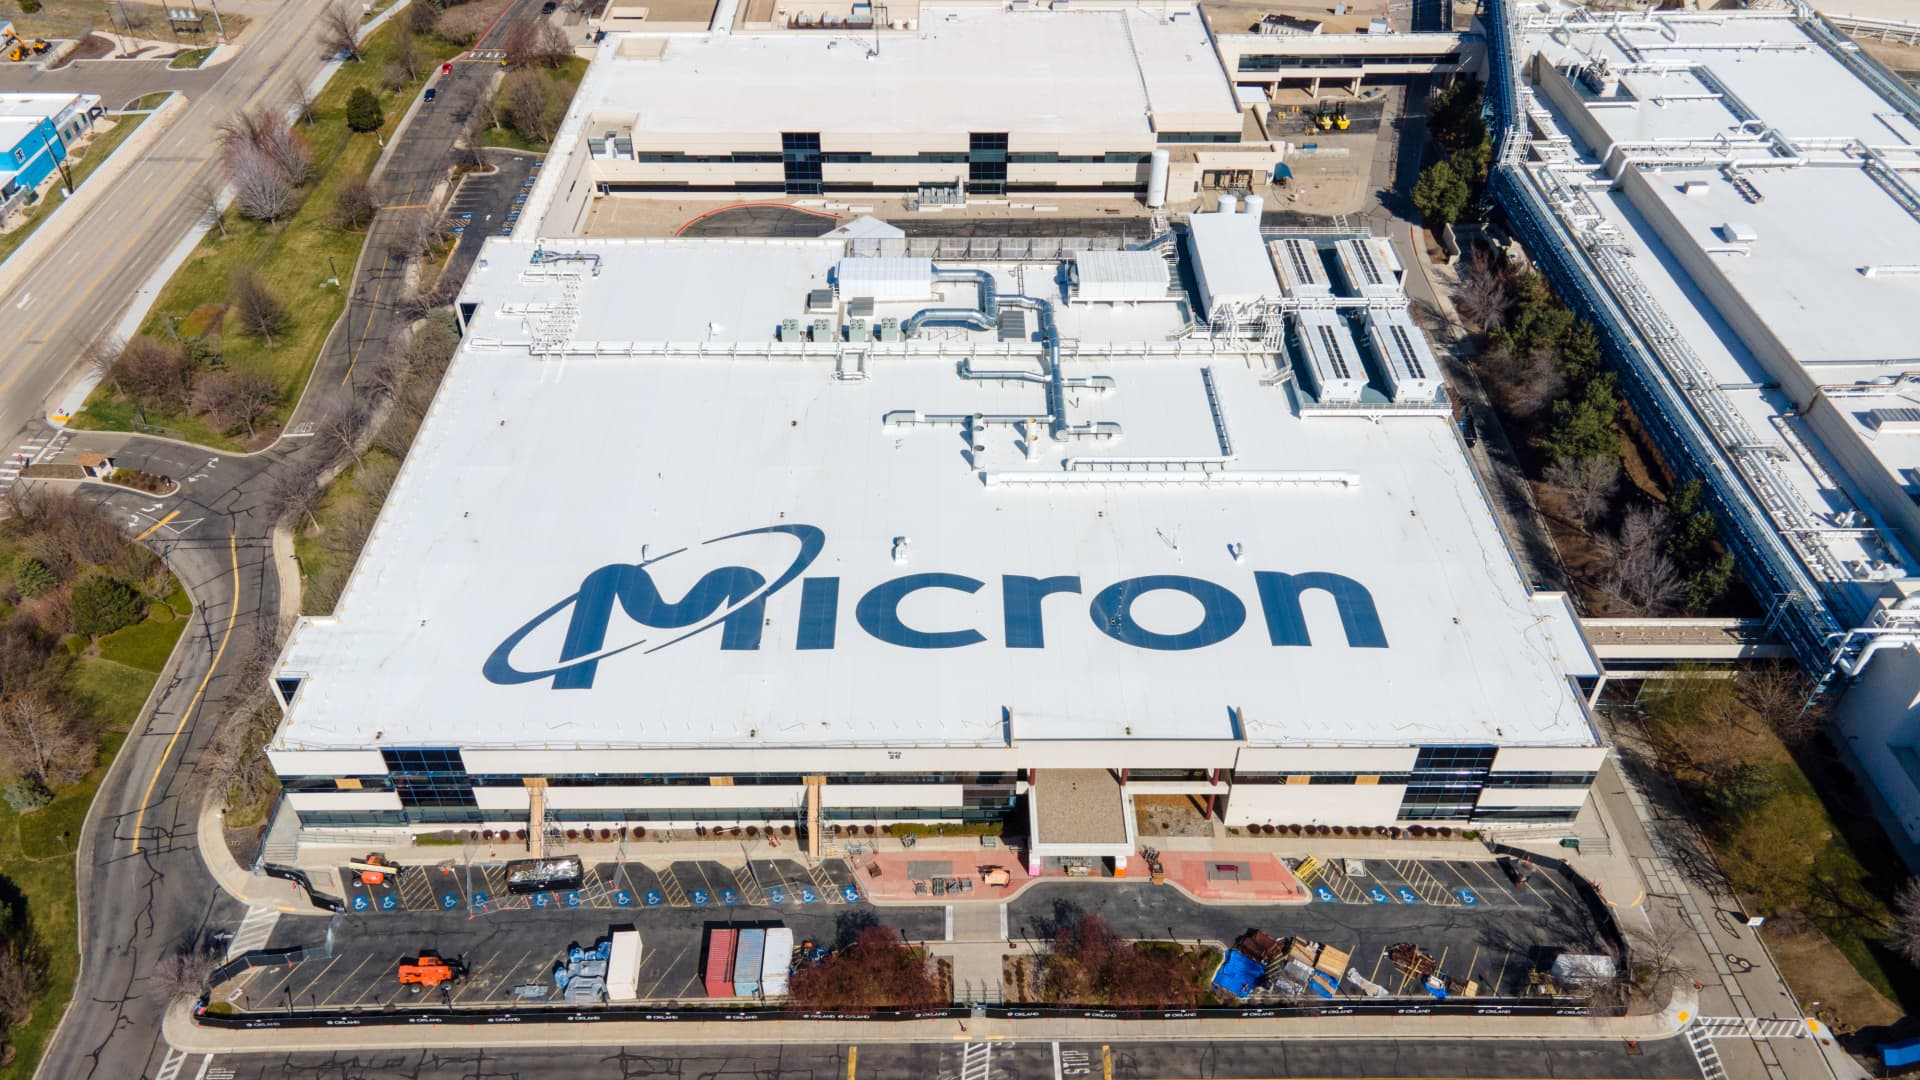 Buy Micron stock as a chip downcycle ends and stronger pricing emerges, Deutsche Bank says